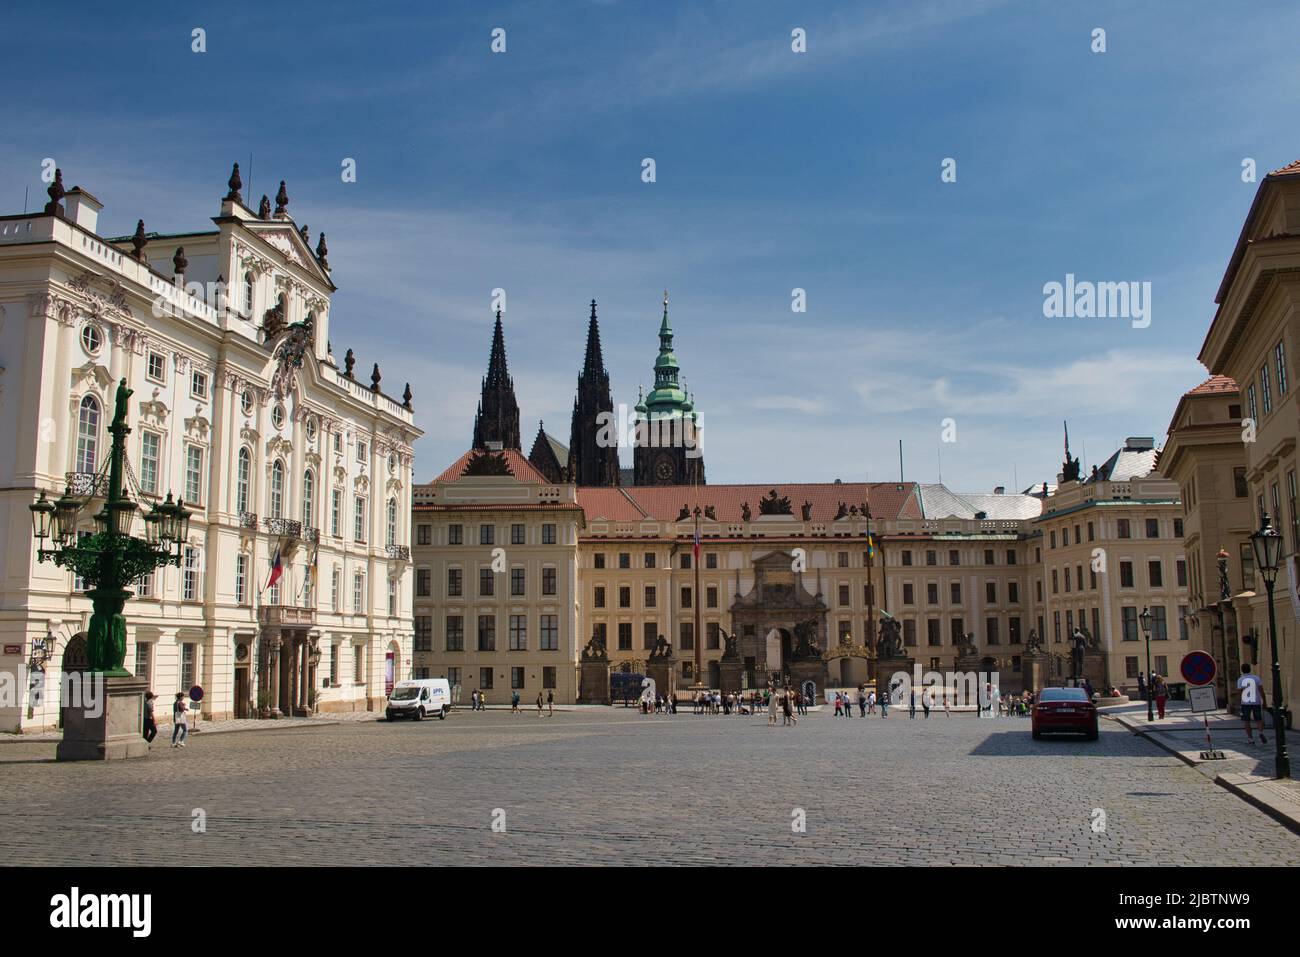 Amazing view on almost empty Hradcany square in Prague, famous Prague Castle in background. Czech Republic. Stock Photo